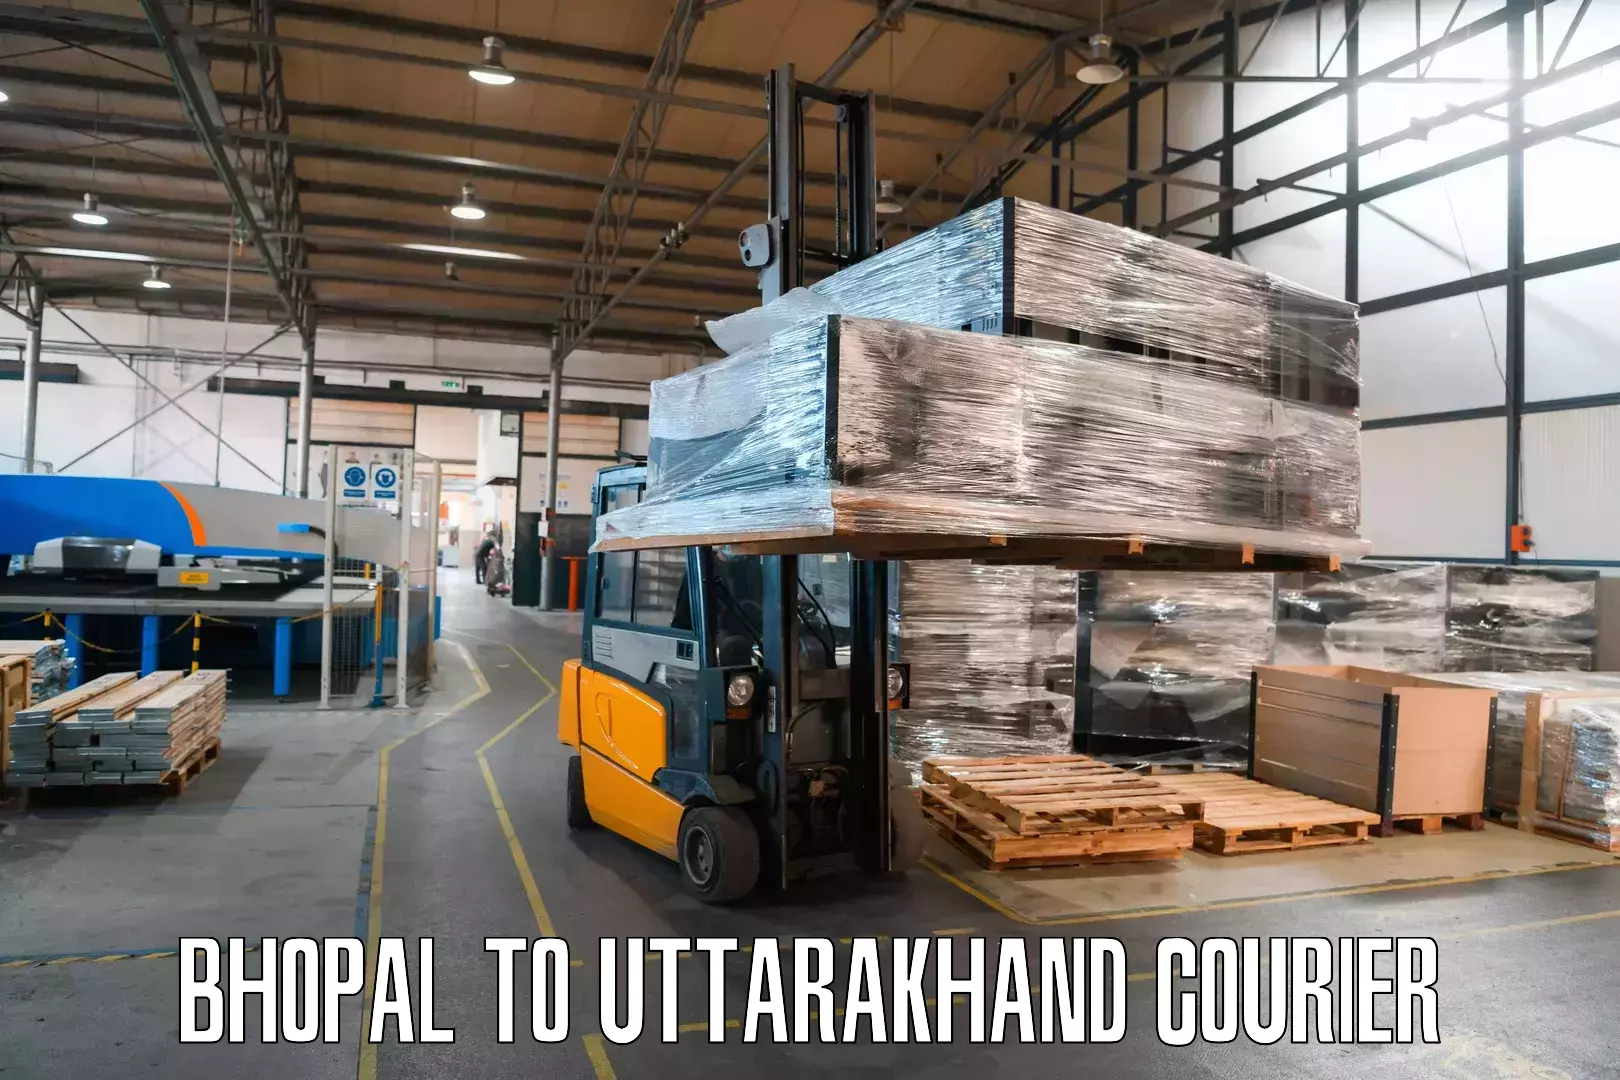 Customized delivery options Bhopal to Uttarakhand